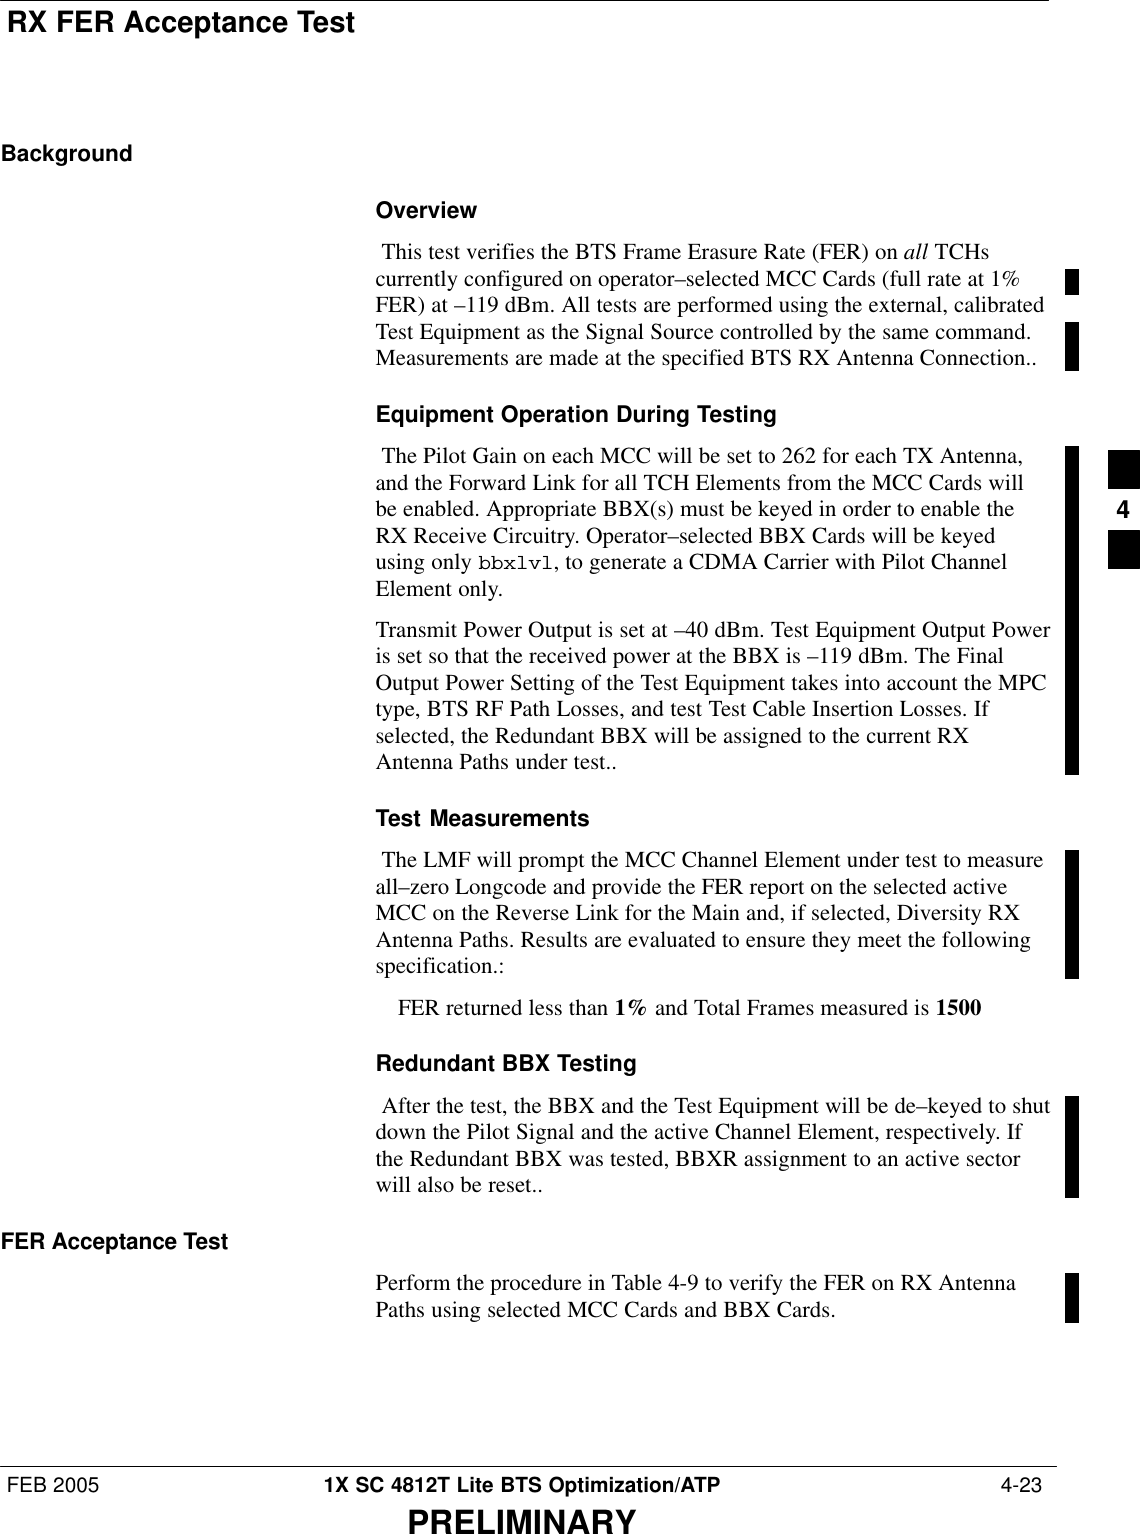 RX FER Acceptance TestFEB 2005 1X SC 4812T Lite BTS Optimization/ATP  4-23PRELIMINARYBackgroundOverview This test verifies the BTS Frame Erasure Rate (FER) on all TCHscurrently configured on operator–selected MCC Cards (full rate at 1%FER) at –119 dBm. All tests are performed using the external, calibratedTest Equipment as the Signal Source controlled by the same command.Measurements are made at the specified BTS RX Antenna Connection..Equipment Operation During Testing The Pilot Gain on each MCC will be set to 262 for each TX Antenna,and the Forward Link for all TCH Elements from the MCC Cards willbe enabled. Appropriate BBX(s) must be keyed in order to enable theRX Receive Circuitry. Operator–selected BBX Cards will be keyedusing only bbxlvl, to generate a CDMA Carrier with Pilot ChannelElement only. Transmit Power Output is set at –40 dBm. Test Equipment Output Poweris set so that the received power at the BBX is –119 dBm. The FinalOutput Power Setting of the Test Equipment takes into account the MPCtype, BTS RF Path Losses, and test Test Cable Insertion Losses. Ifselected, the Redundant BBX will be assigned to the current RXAntenna Paths under test..Test Measurements The LMF will prompt the MCC Channel Element under test to measureall–zero Longcode and provide the FER report on the selected activeMCC on the Reverse Link for the Main and, if selected, Diversity RXAntenna Paths. Results are evaluated to ensure they meet the followingspecification.:FER returned less than 1% and Total Frames measured is 1500Redundant BBX Testing After the test, the BBX and the Test Equipment will be de–keyed to shutdown the Pilot Signal and the active Channel Element, respectively. Ifthe Redundant BBX was tested, BBXR assignment to an active sectorwill also be reset..FER Acceptance TestPerform the procedure in Table 4-9 to verify the FER on RX AntennaPaths using selected MCC Cards and BBX Cards.4